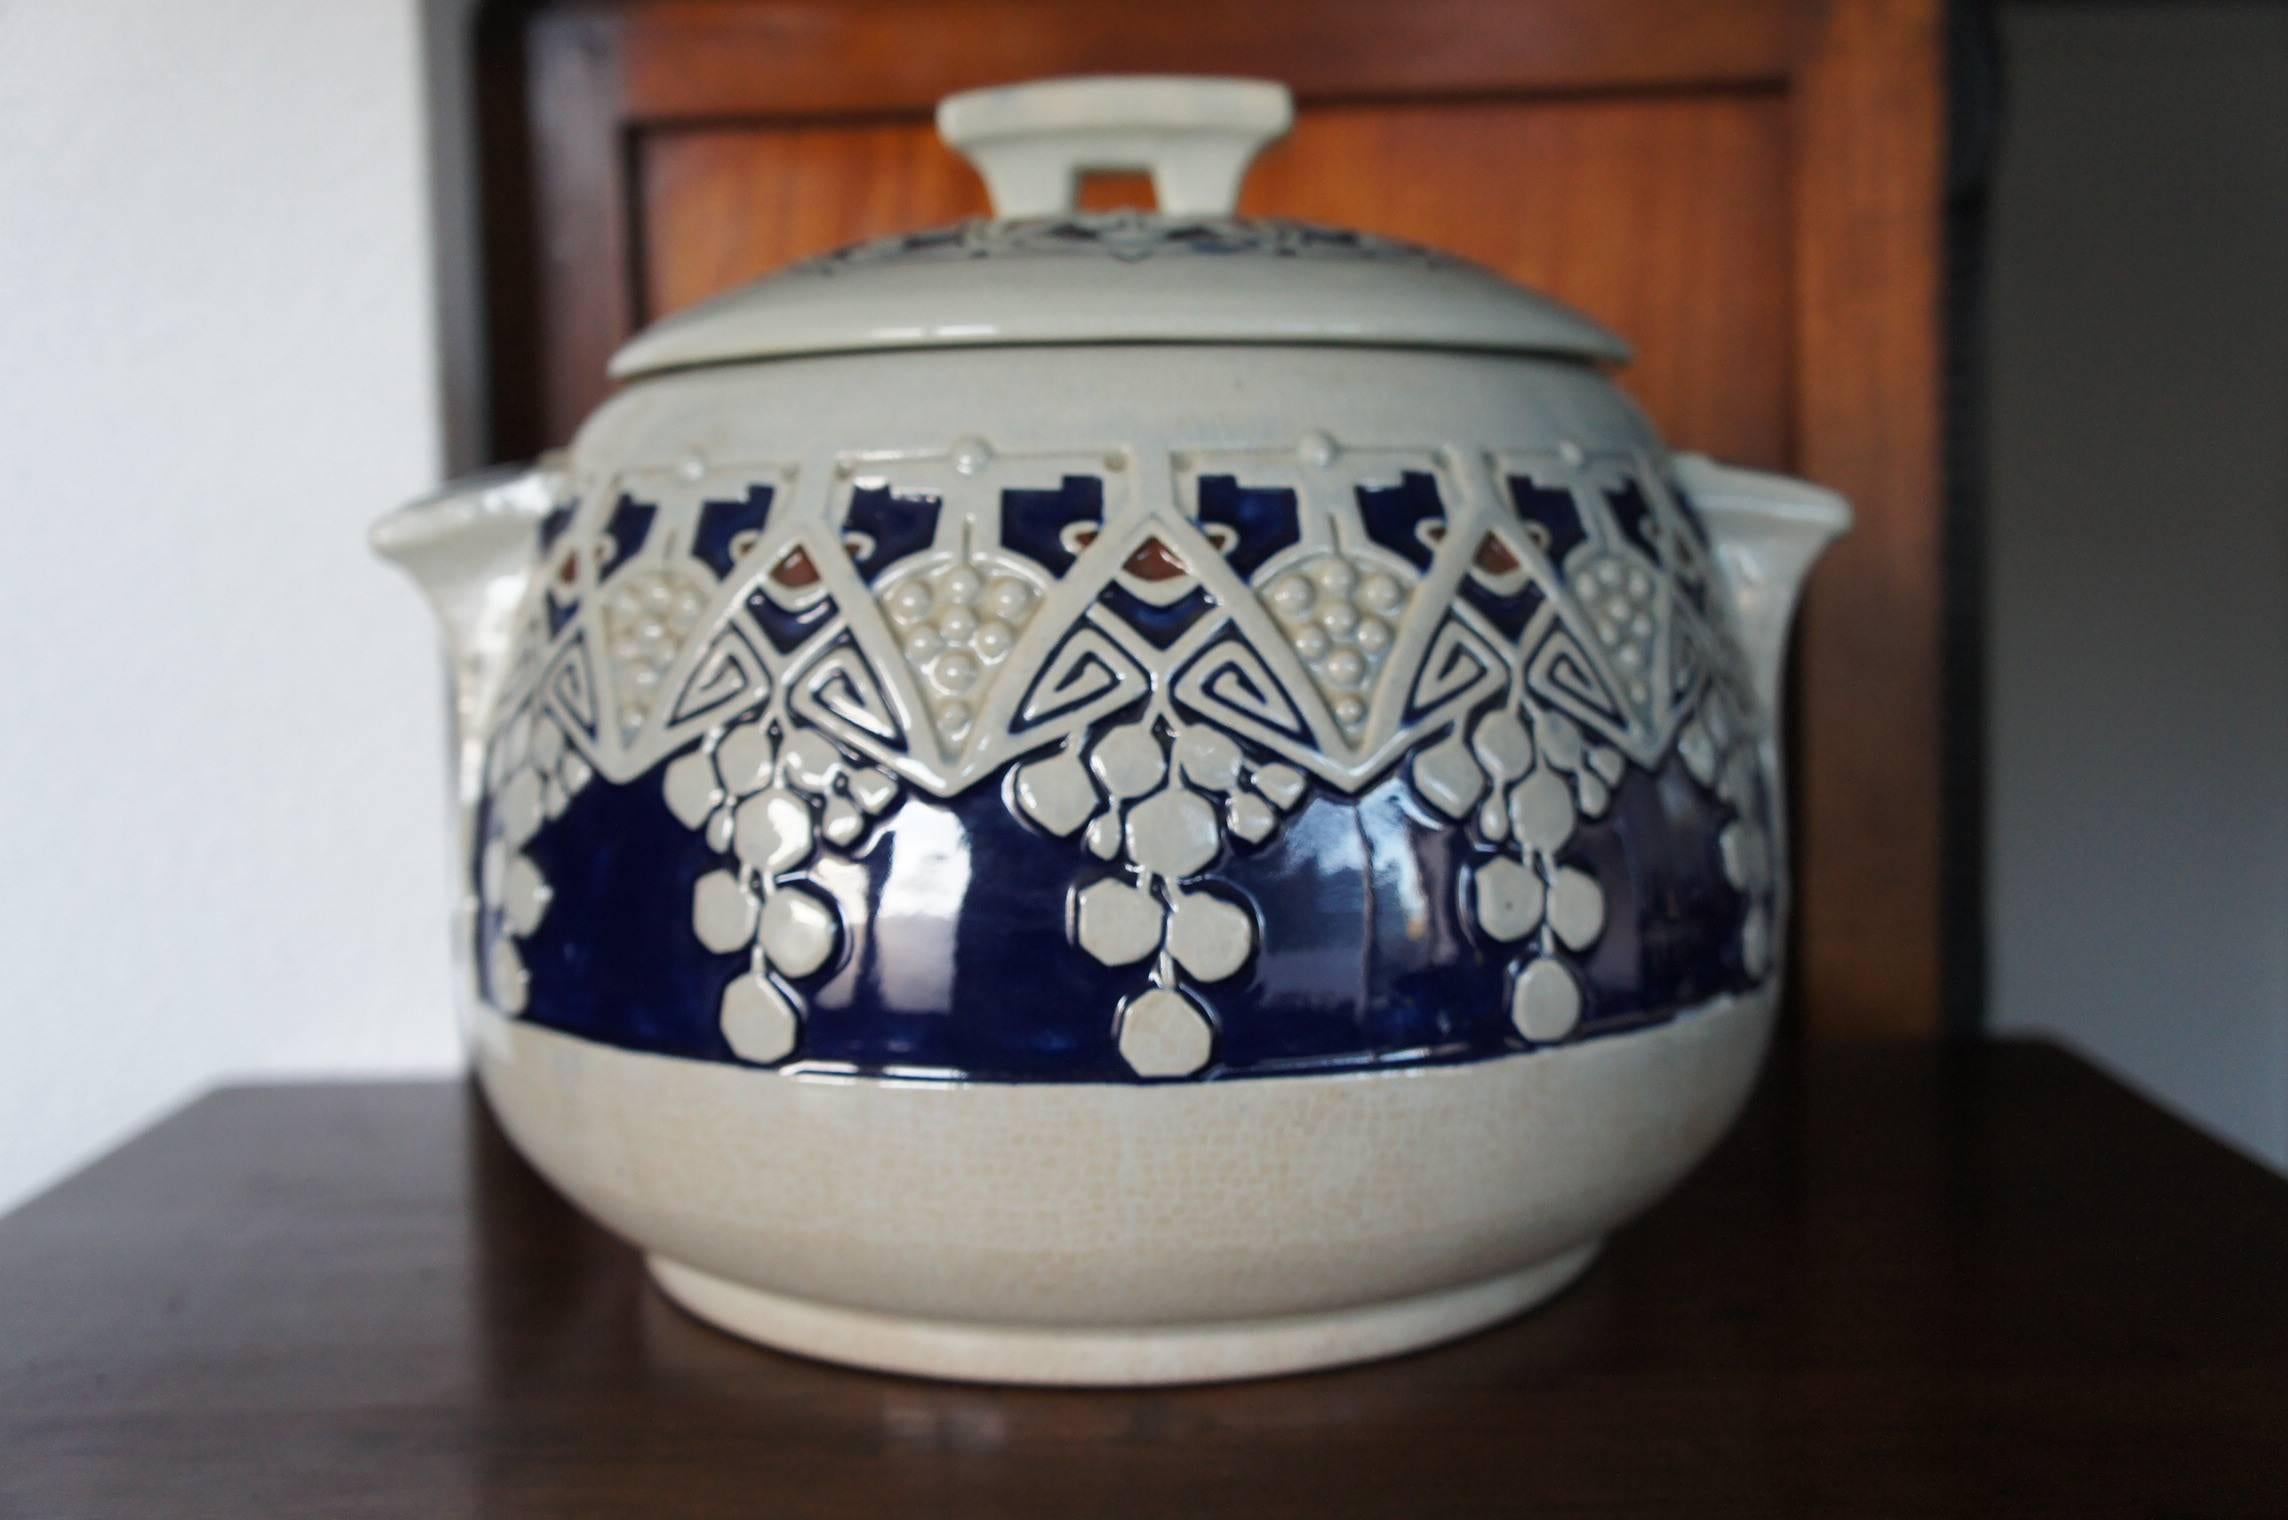 This handcrafted punch bowl is in excellent condition.

The Jugendstil motives on this glazed earthenware punchbowl are stunning. The glazing is done in a similar technique as enamelling and the result with the deep blue color is beautiful. There is